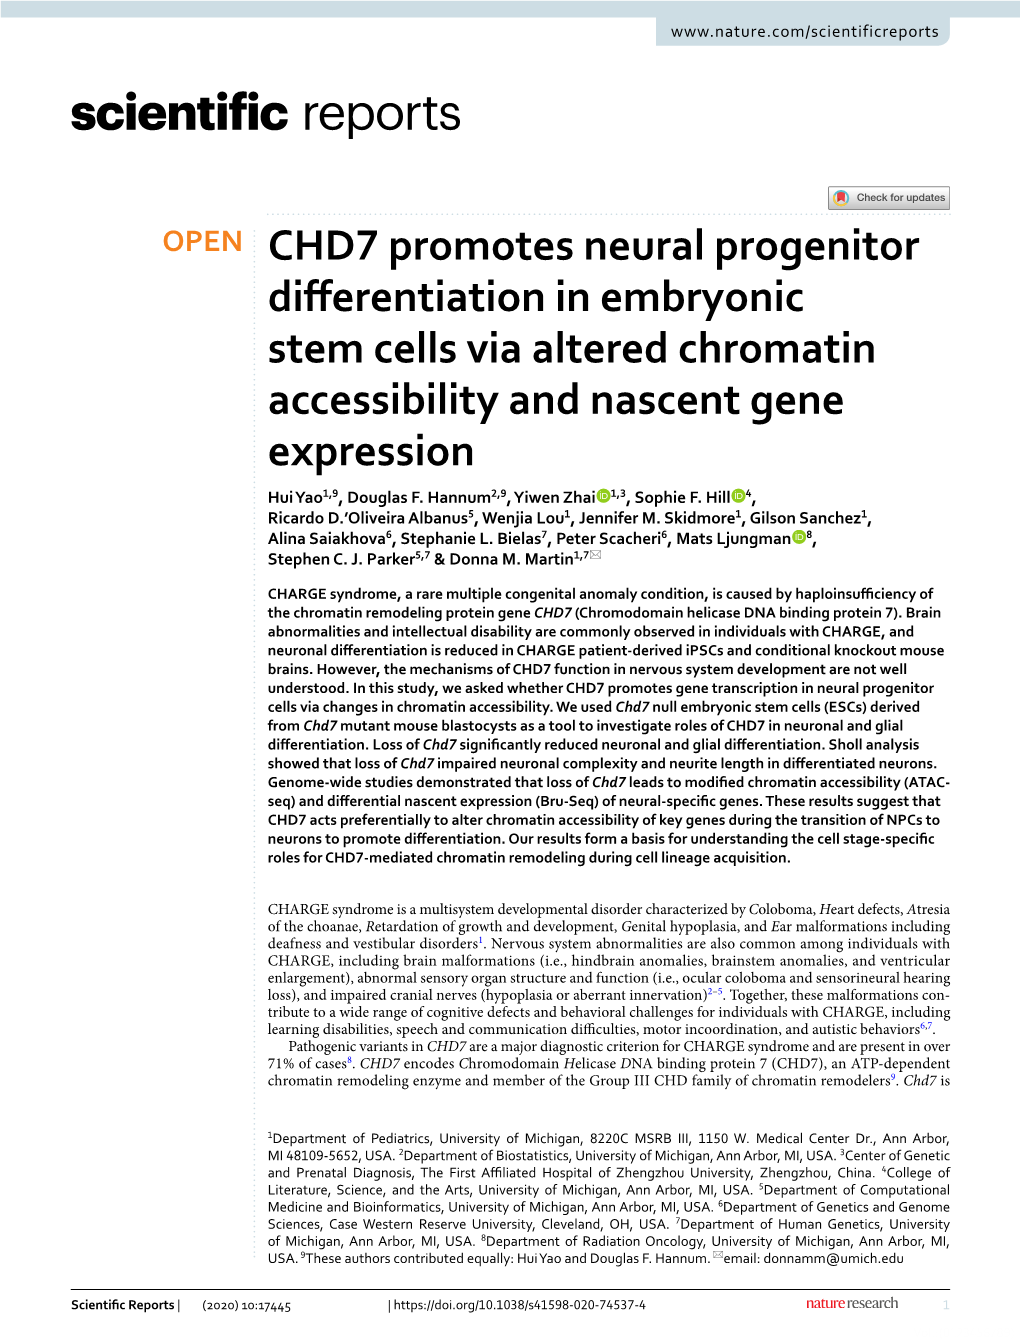 CHD7 Promotes Neural Progenitor Differentiation in Embryonic Stem